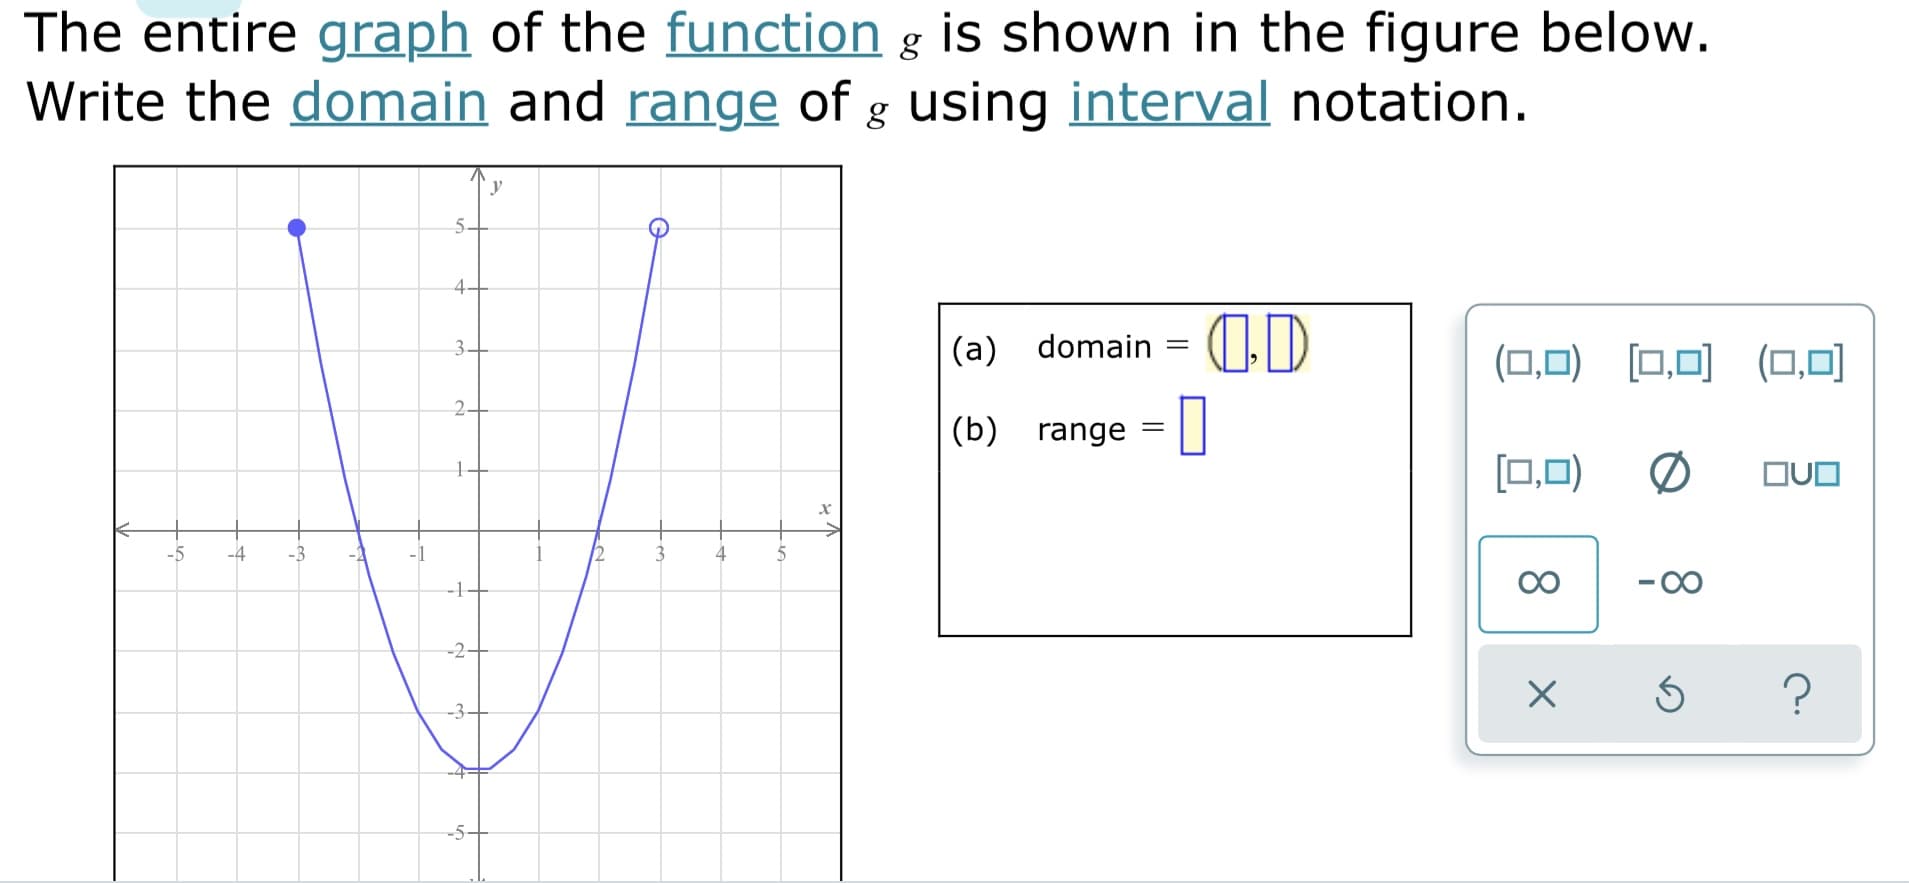 The entire graph of the function g is shown in the figure below.
Write the domain and range of g using interval notation.
У
5.
4-
domain = 1)
OD
(0,미) [□,미 (,미
3.
2-
(b) range =||
[0,0)
OUO
-5
-4
-3
-2
-1
4
- 00
-2-
-3-
-5-
8.
